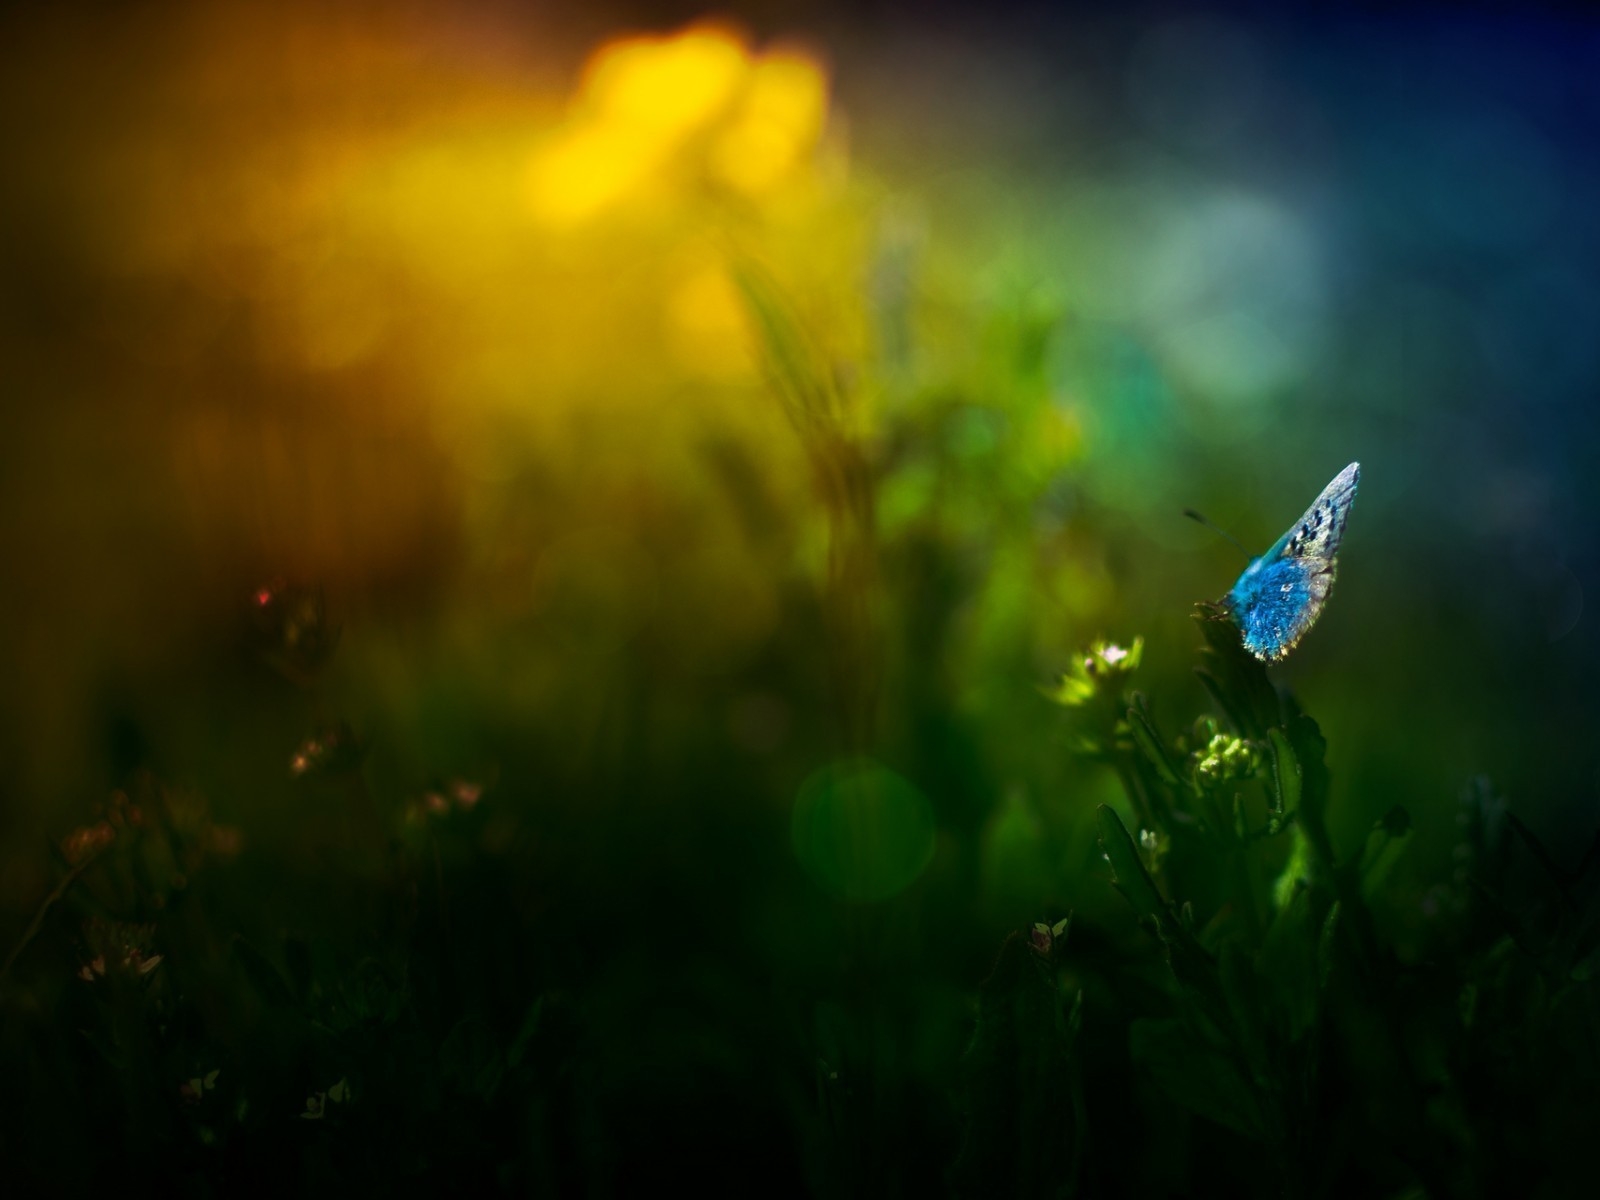 Blue Butterfly on Grass for 1600 x 1200 resolution